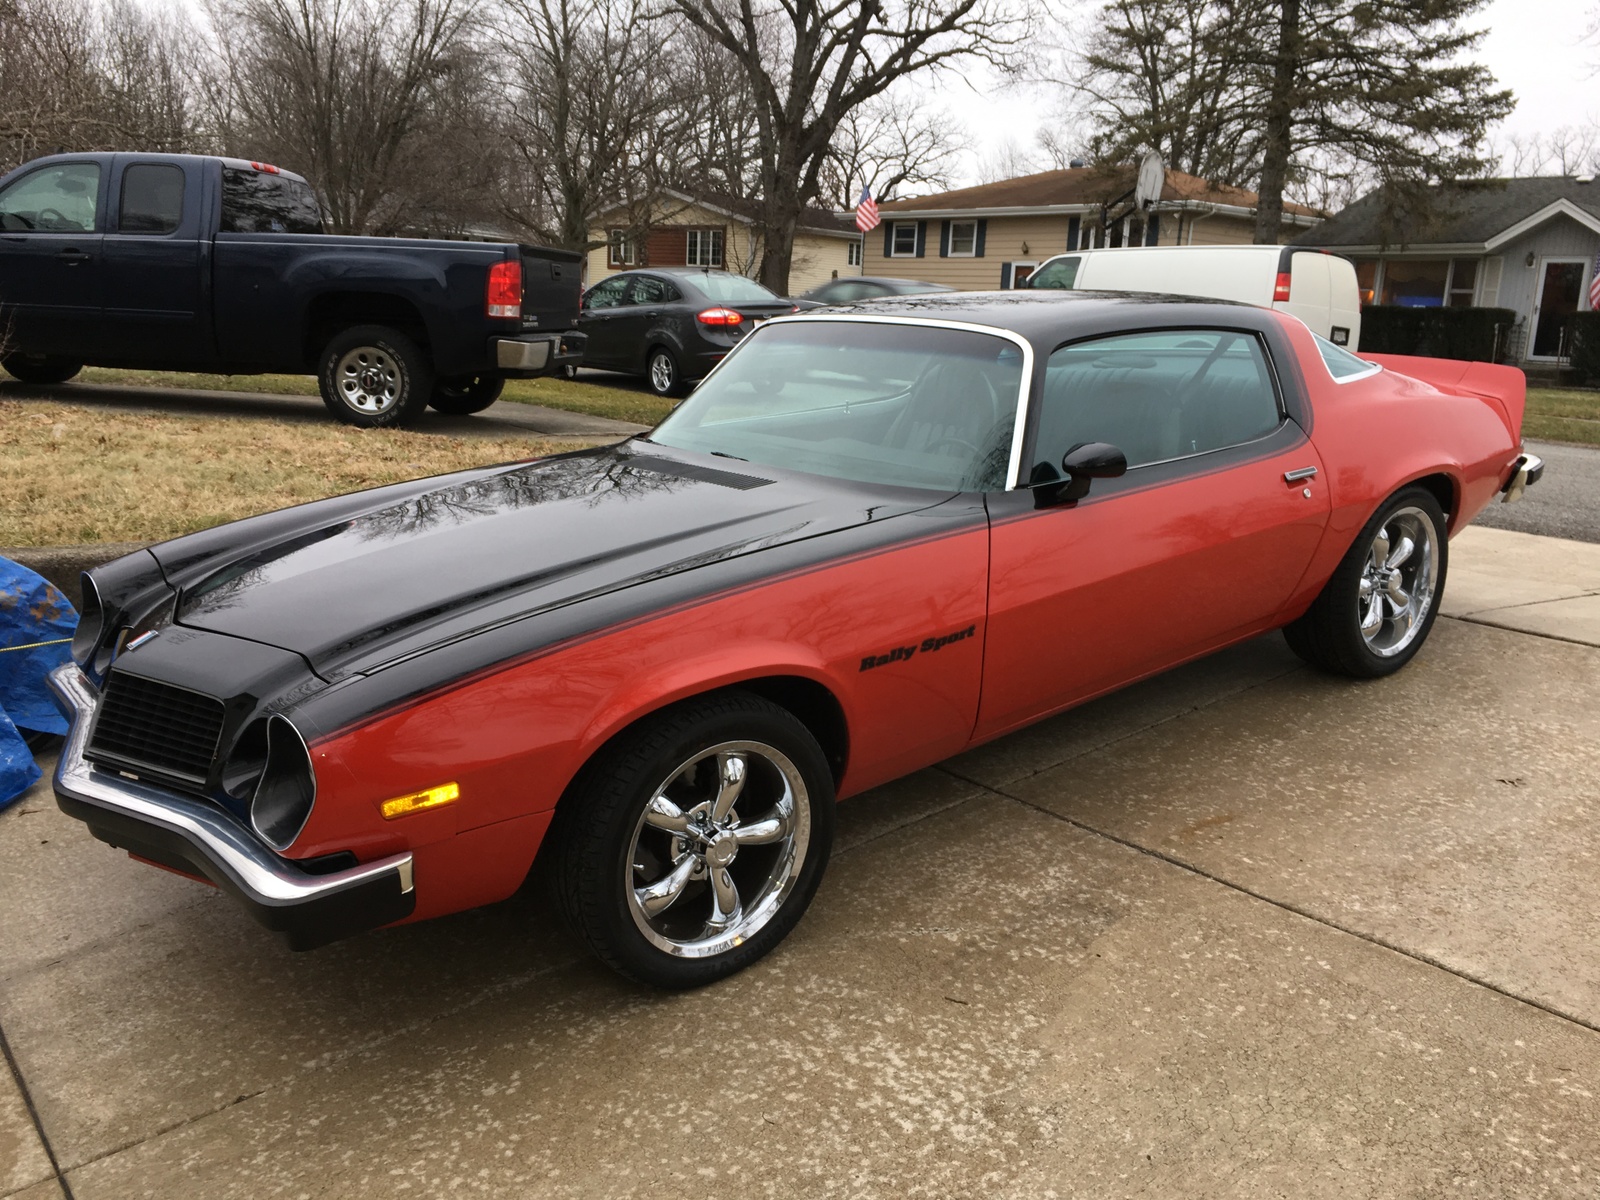 Chevrolet Camaro Questions - Why aren't there many 1975 Camaros for sale? -  CarGurus